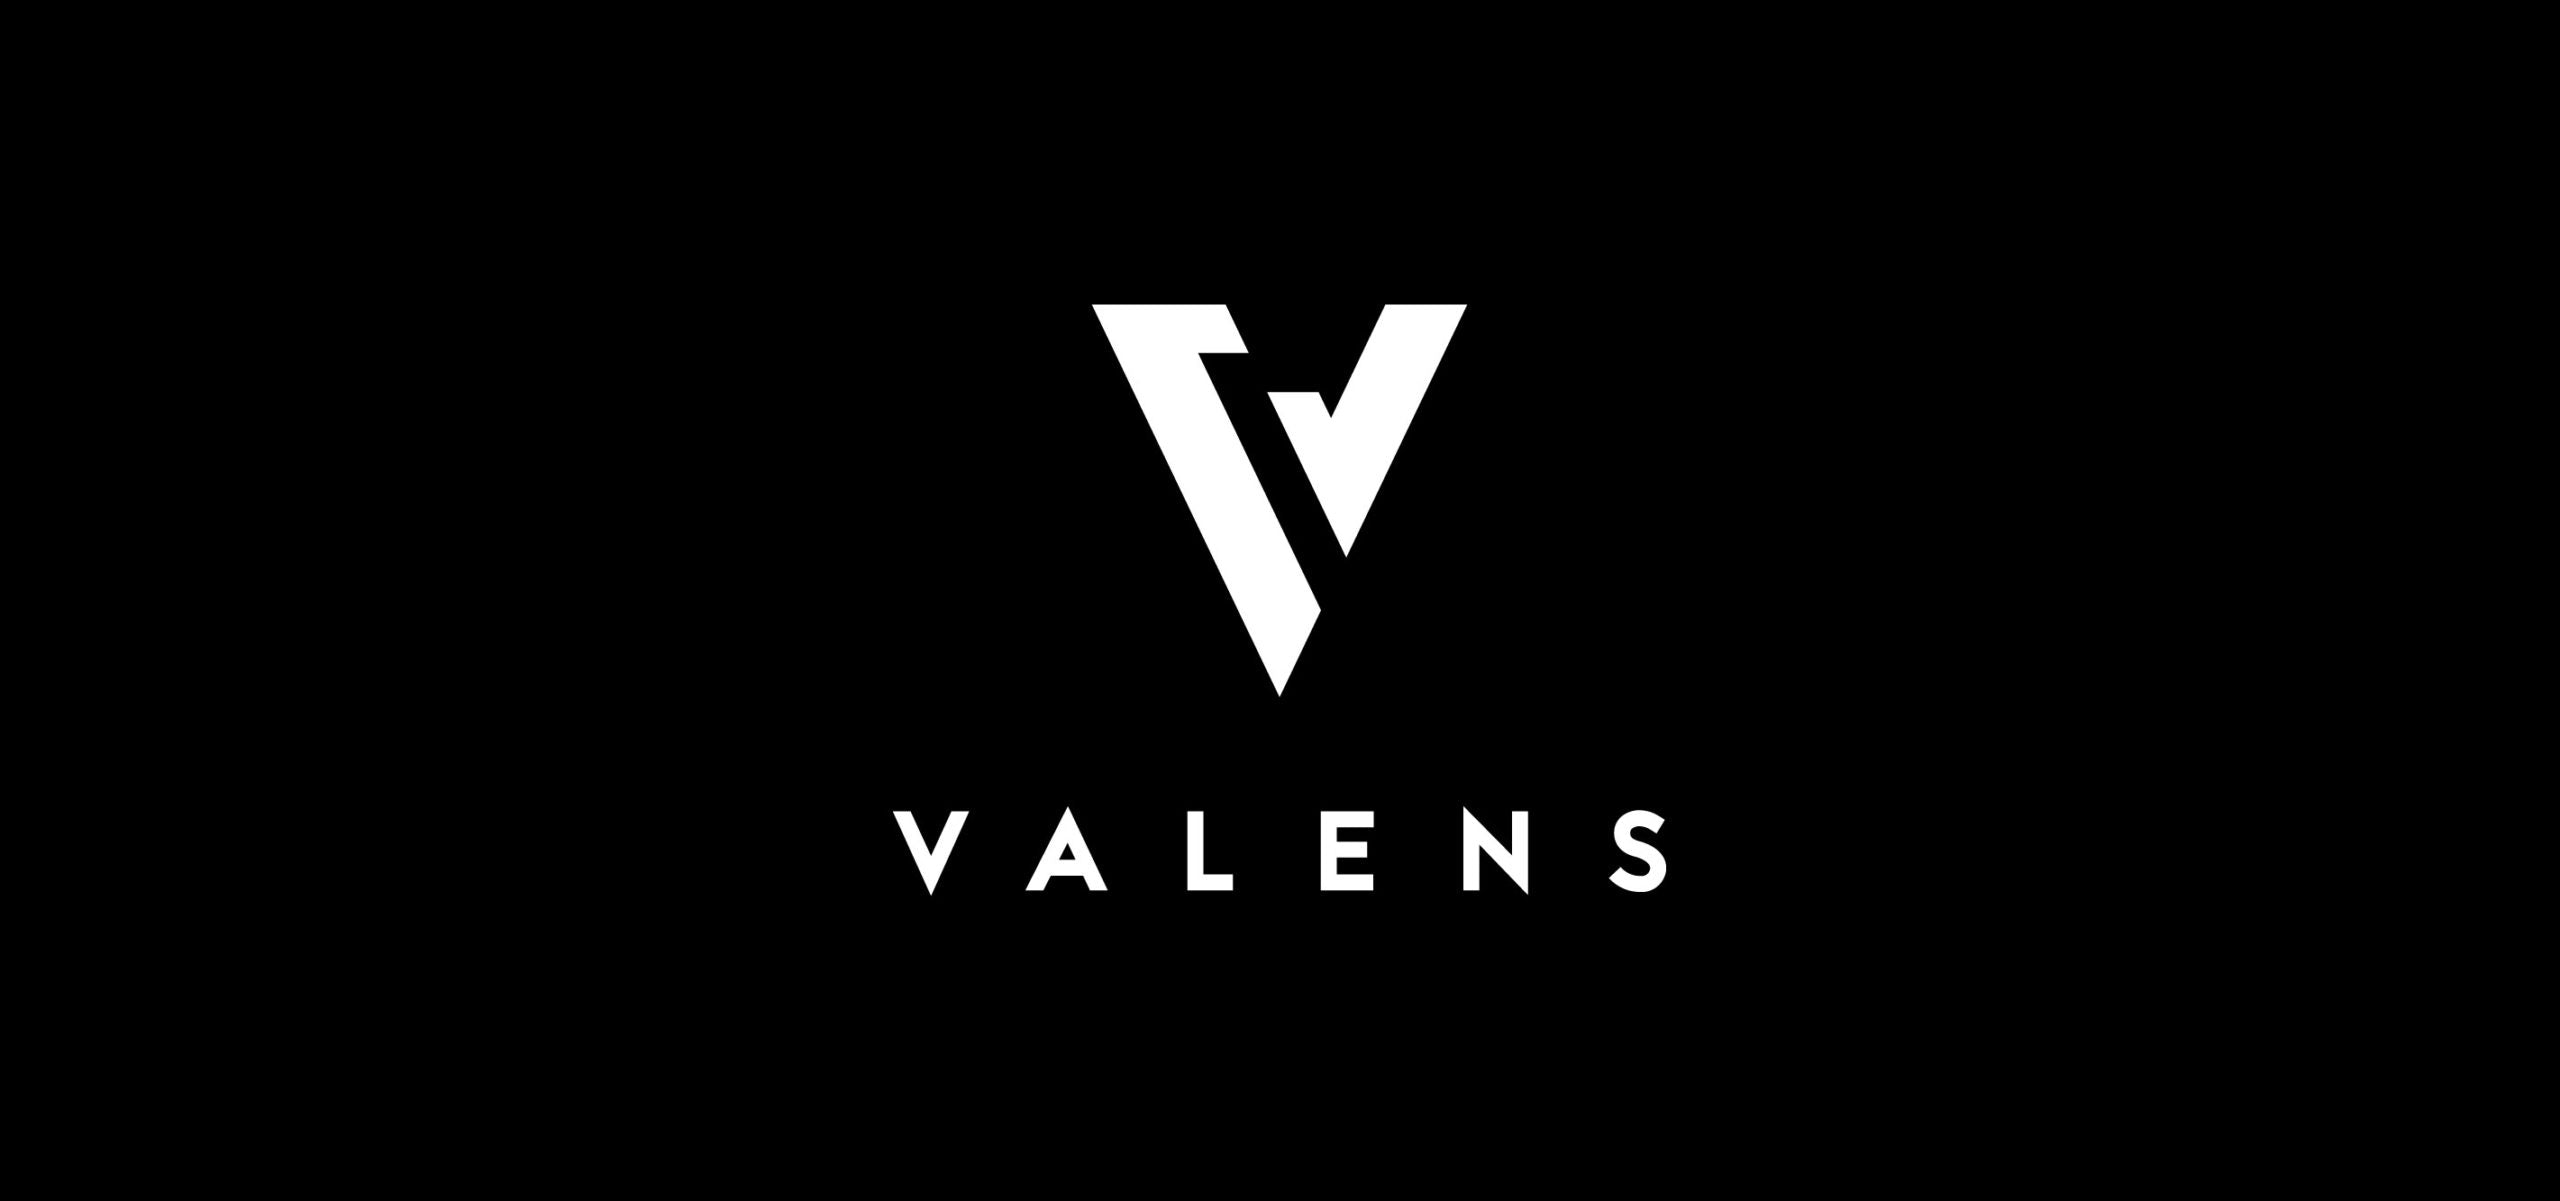 Valens Acquires Top Flower Brand To Create Best-In-Class Cannabis Company